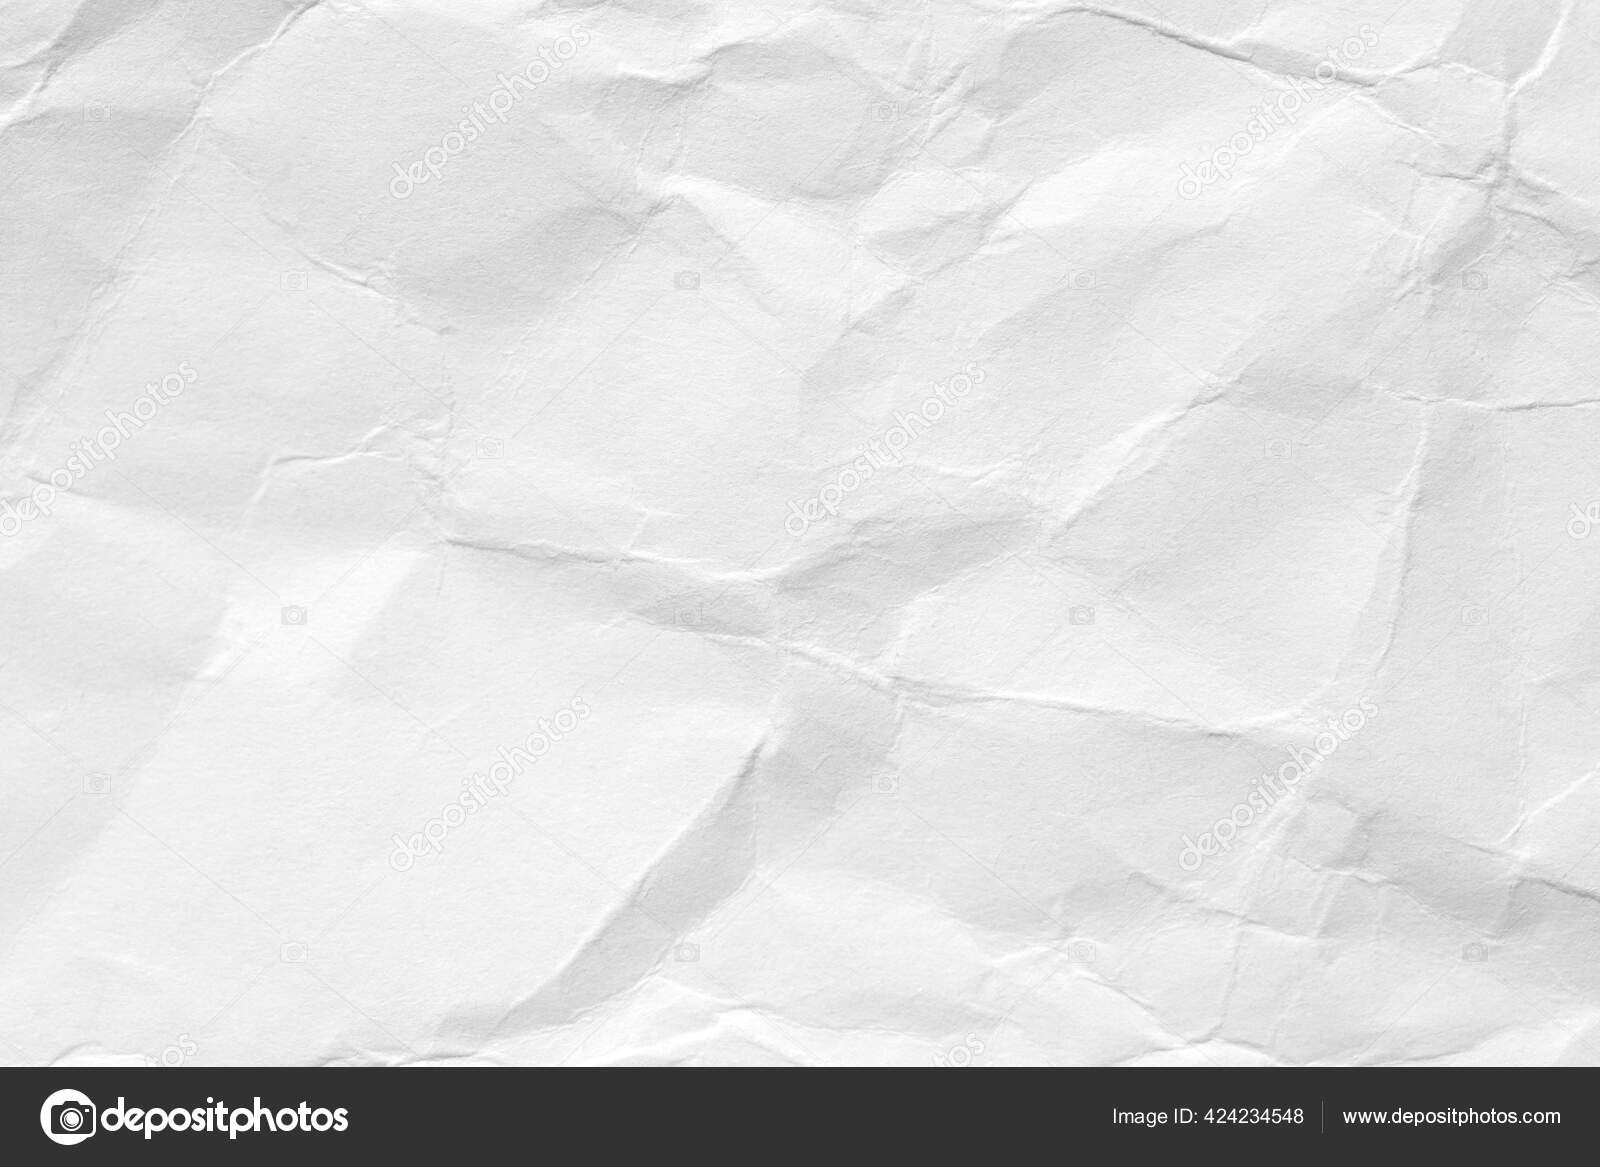 White Crumpled Paper Background Texture Old Web Design Screensavers  Template Stock Photo by © 424234548